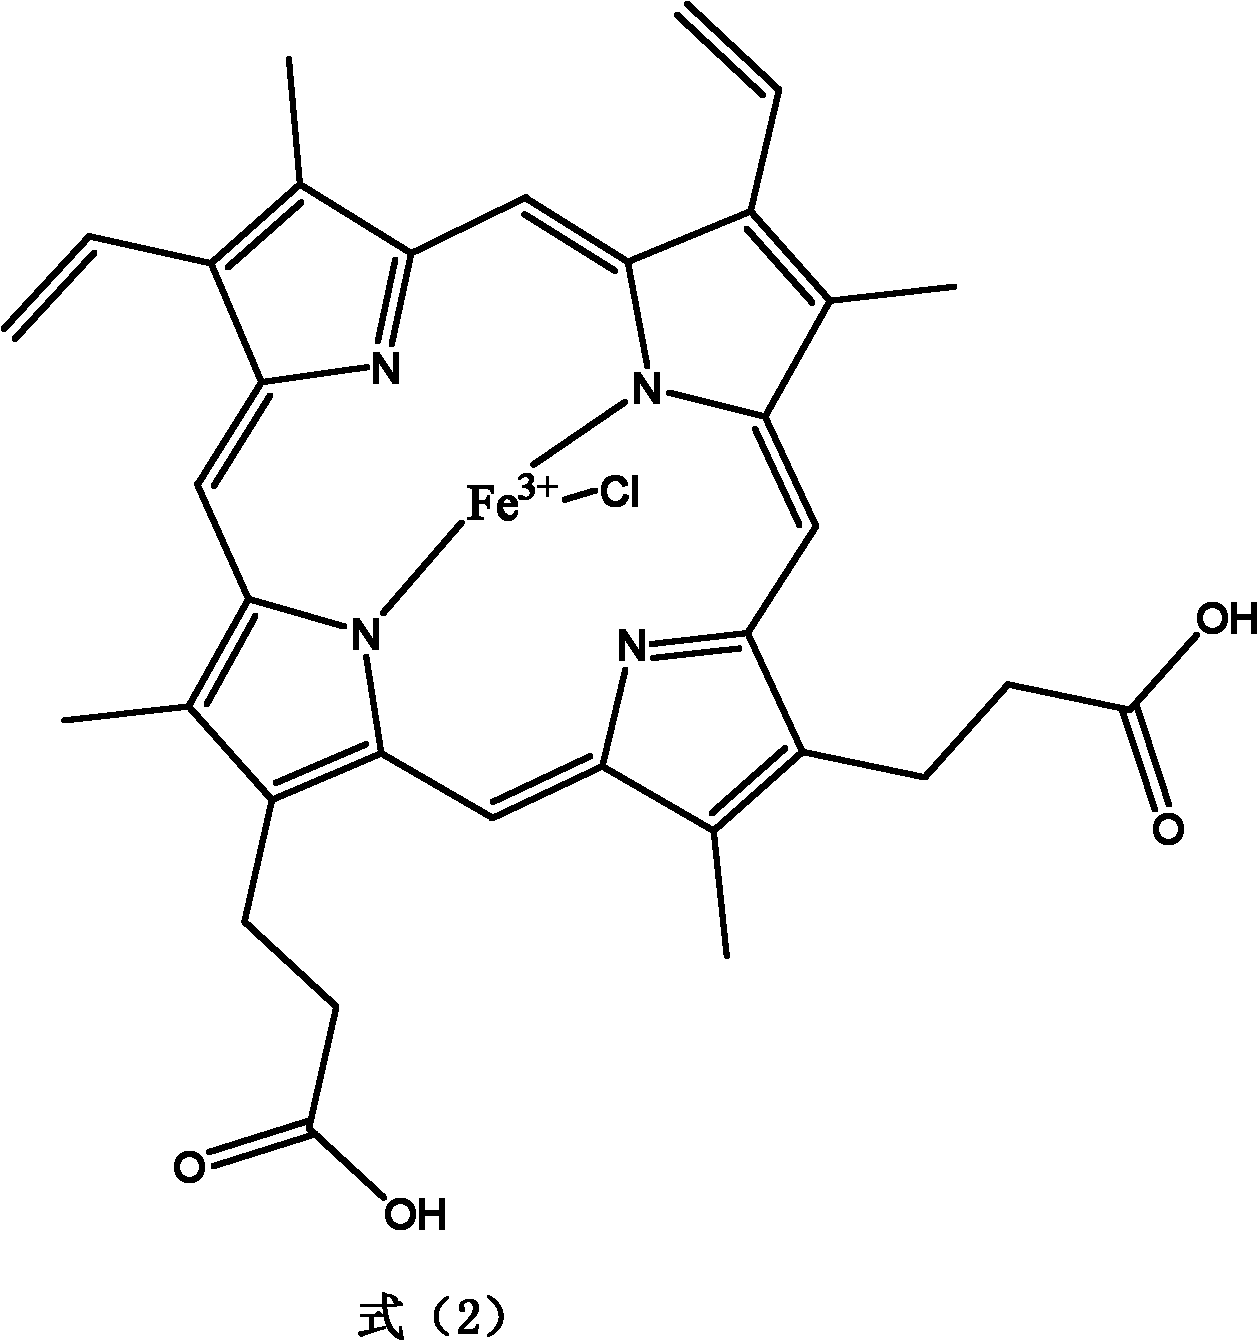 Method for preparing benzaldehyde or substituted benzaldehyde by catalytically oxidizing methylbenzene or substituted methylbenzene